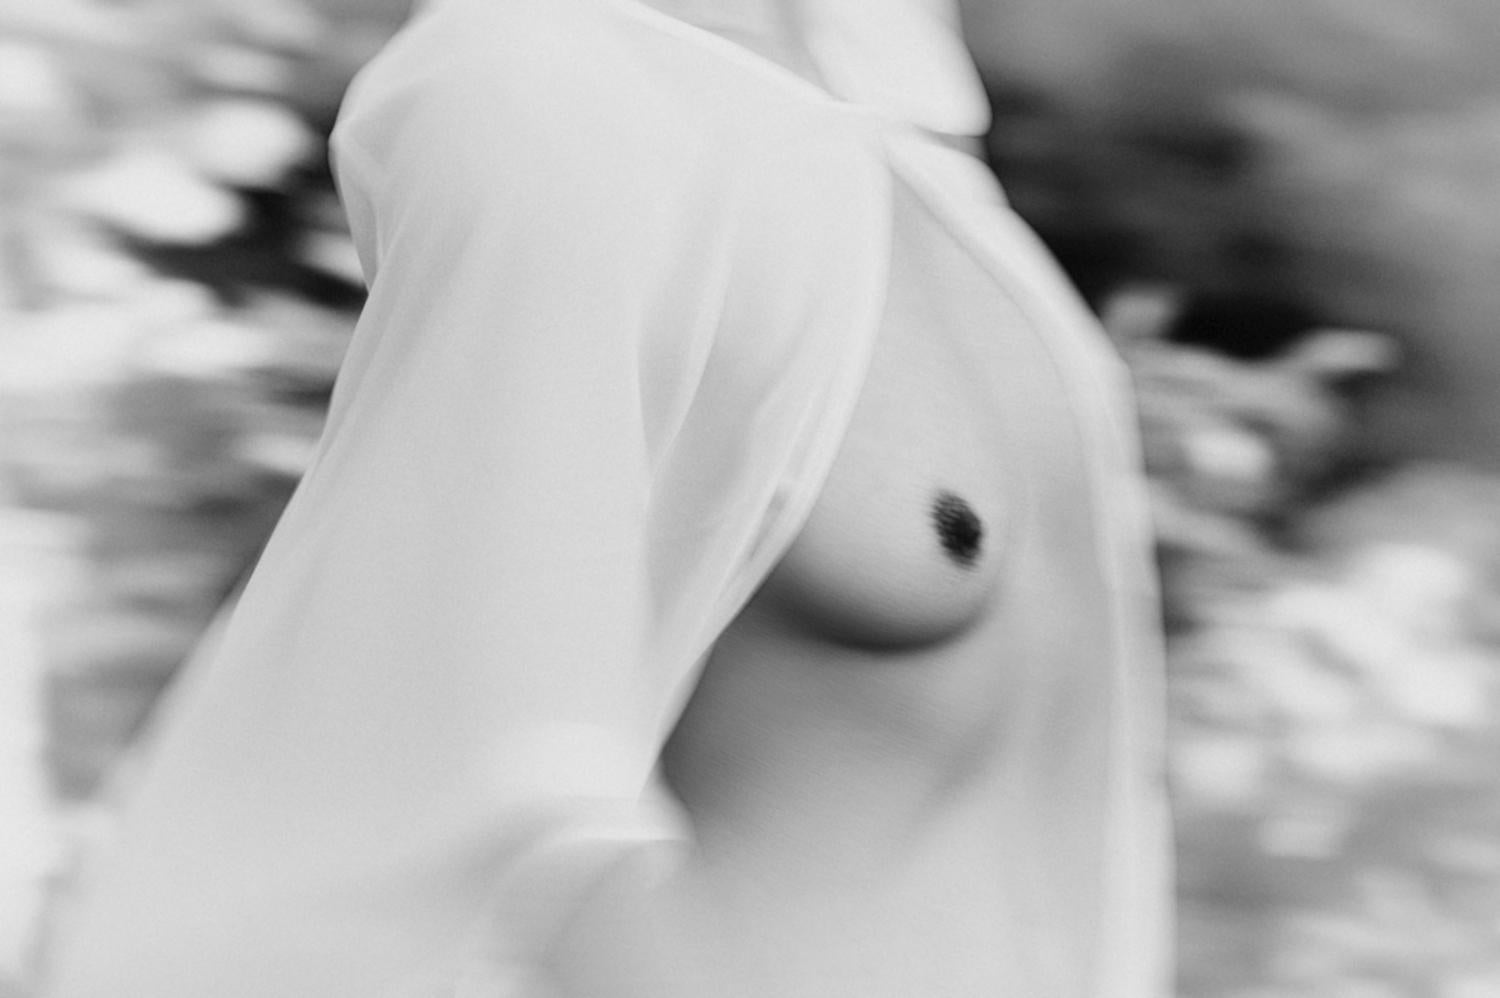 Tina Trumpp Black and White Photograph - Judith - black and white nude showing exposed breasts under a white silk blouse